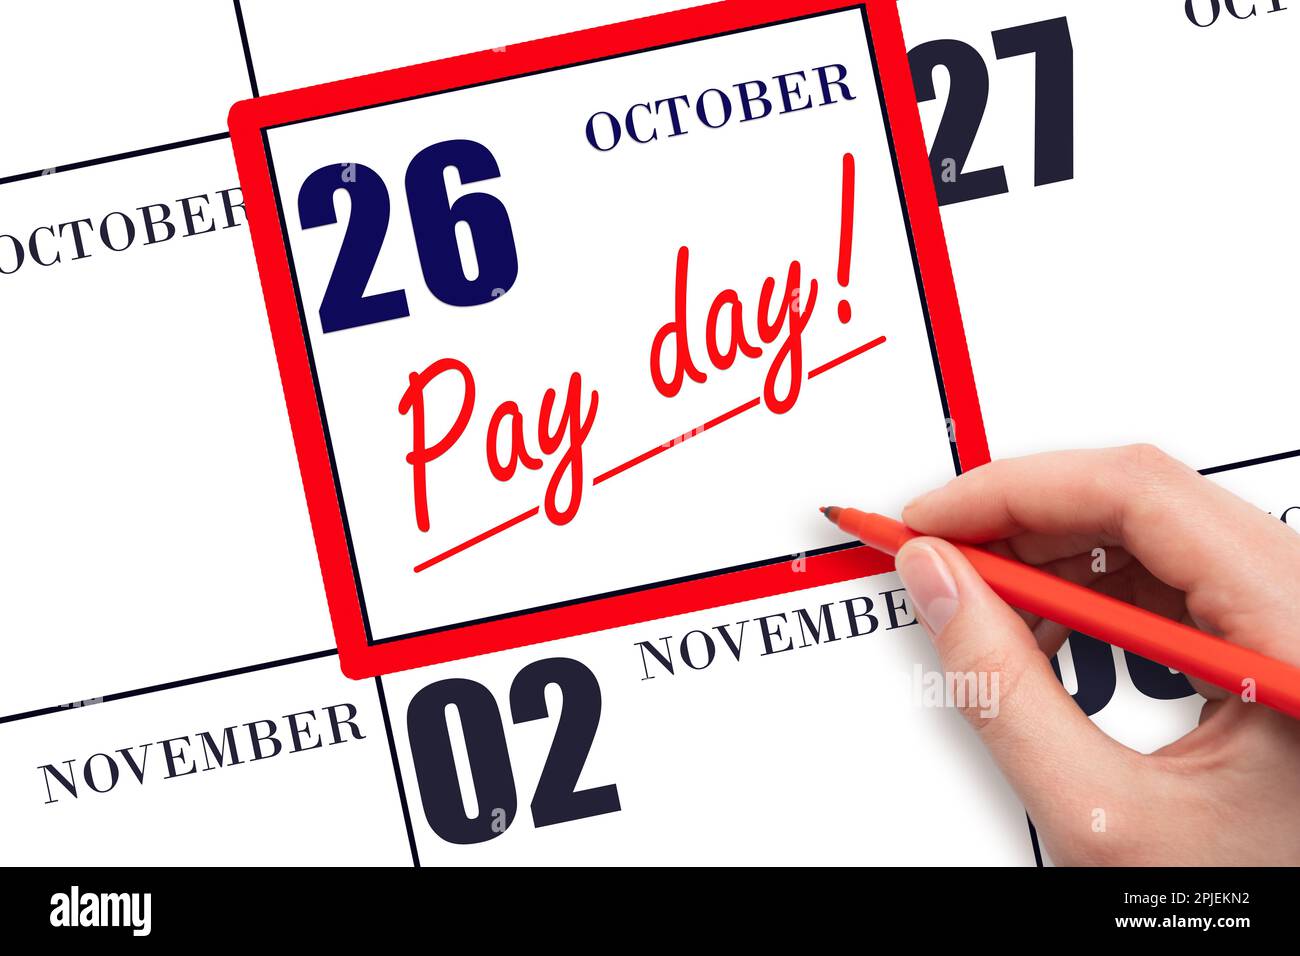 26th day of October. Hand writing text PAY DATE on calendar date October 26 and underline it. Payment due date. Reminder concept of payment. Autumn mo Stock Photo